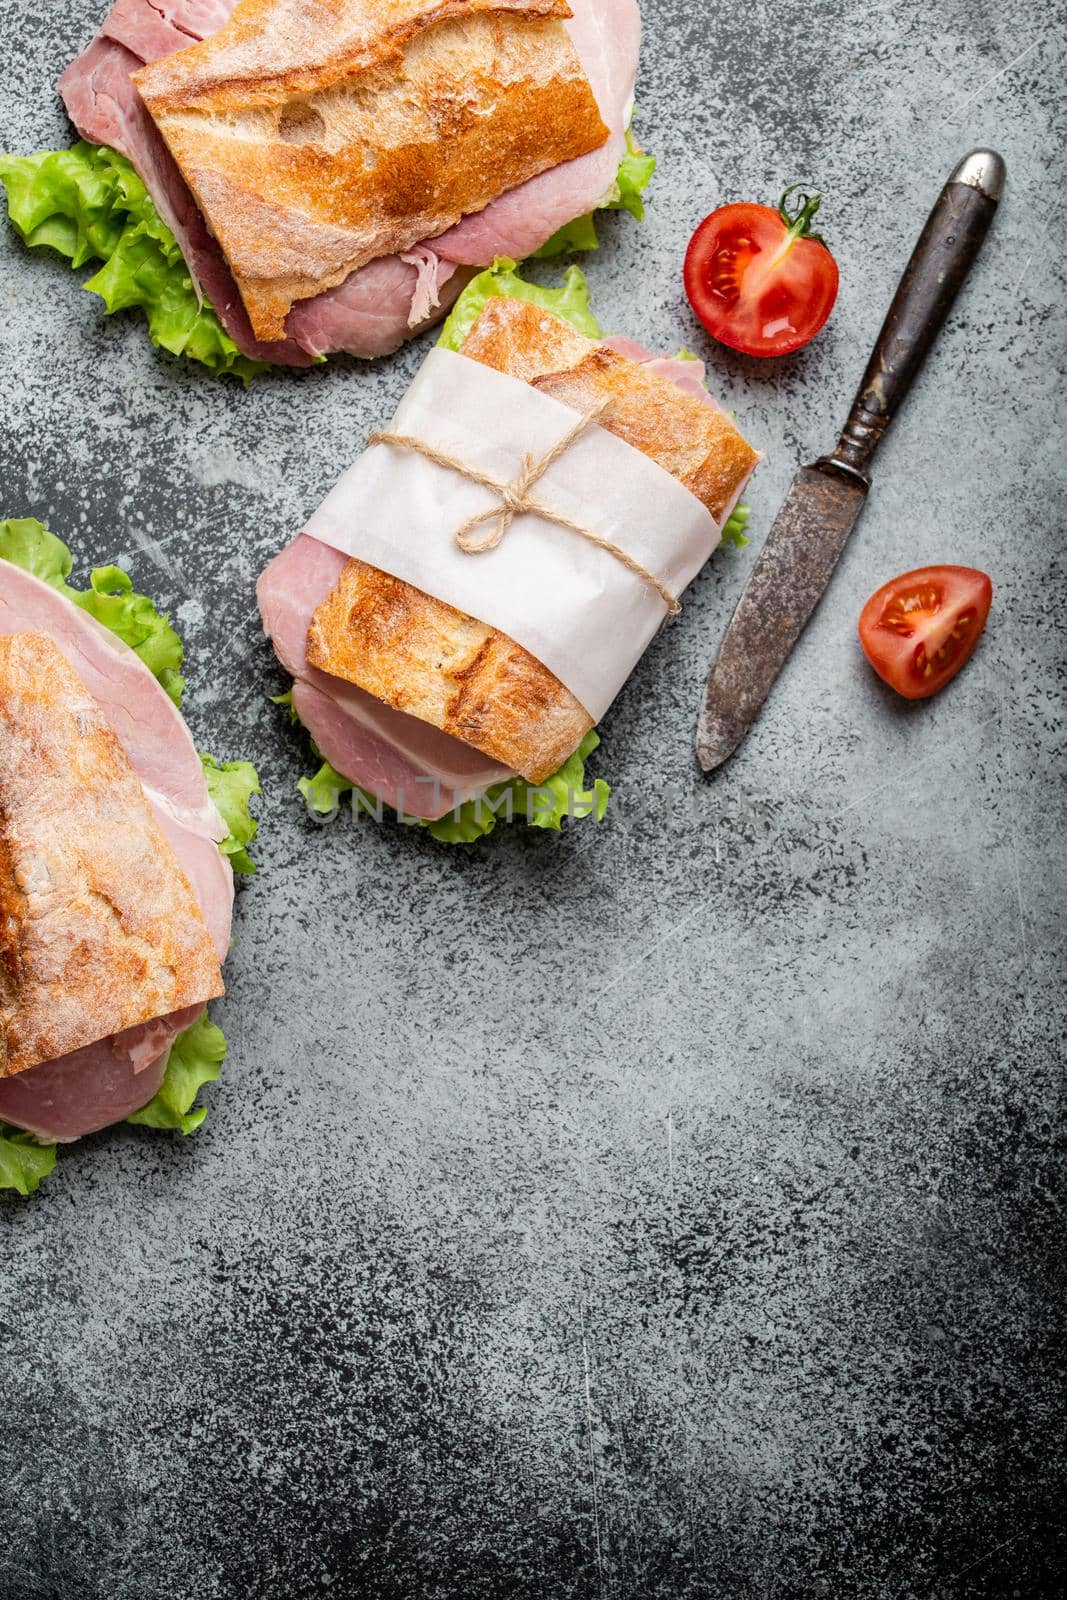 Fresh ciabatta sandwiches with ham, cheese, lettuce, tomatoes on stone concrete background, close-up, top view. Making healthy sandwiches for snack or lunch concept